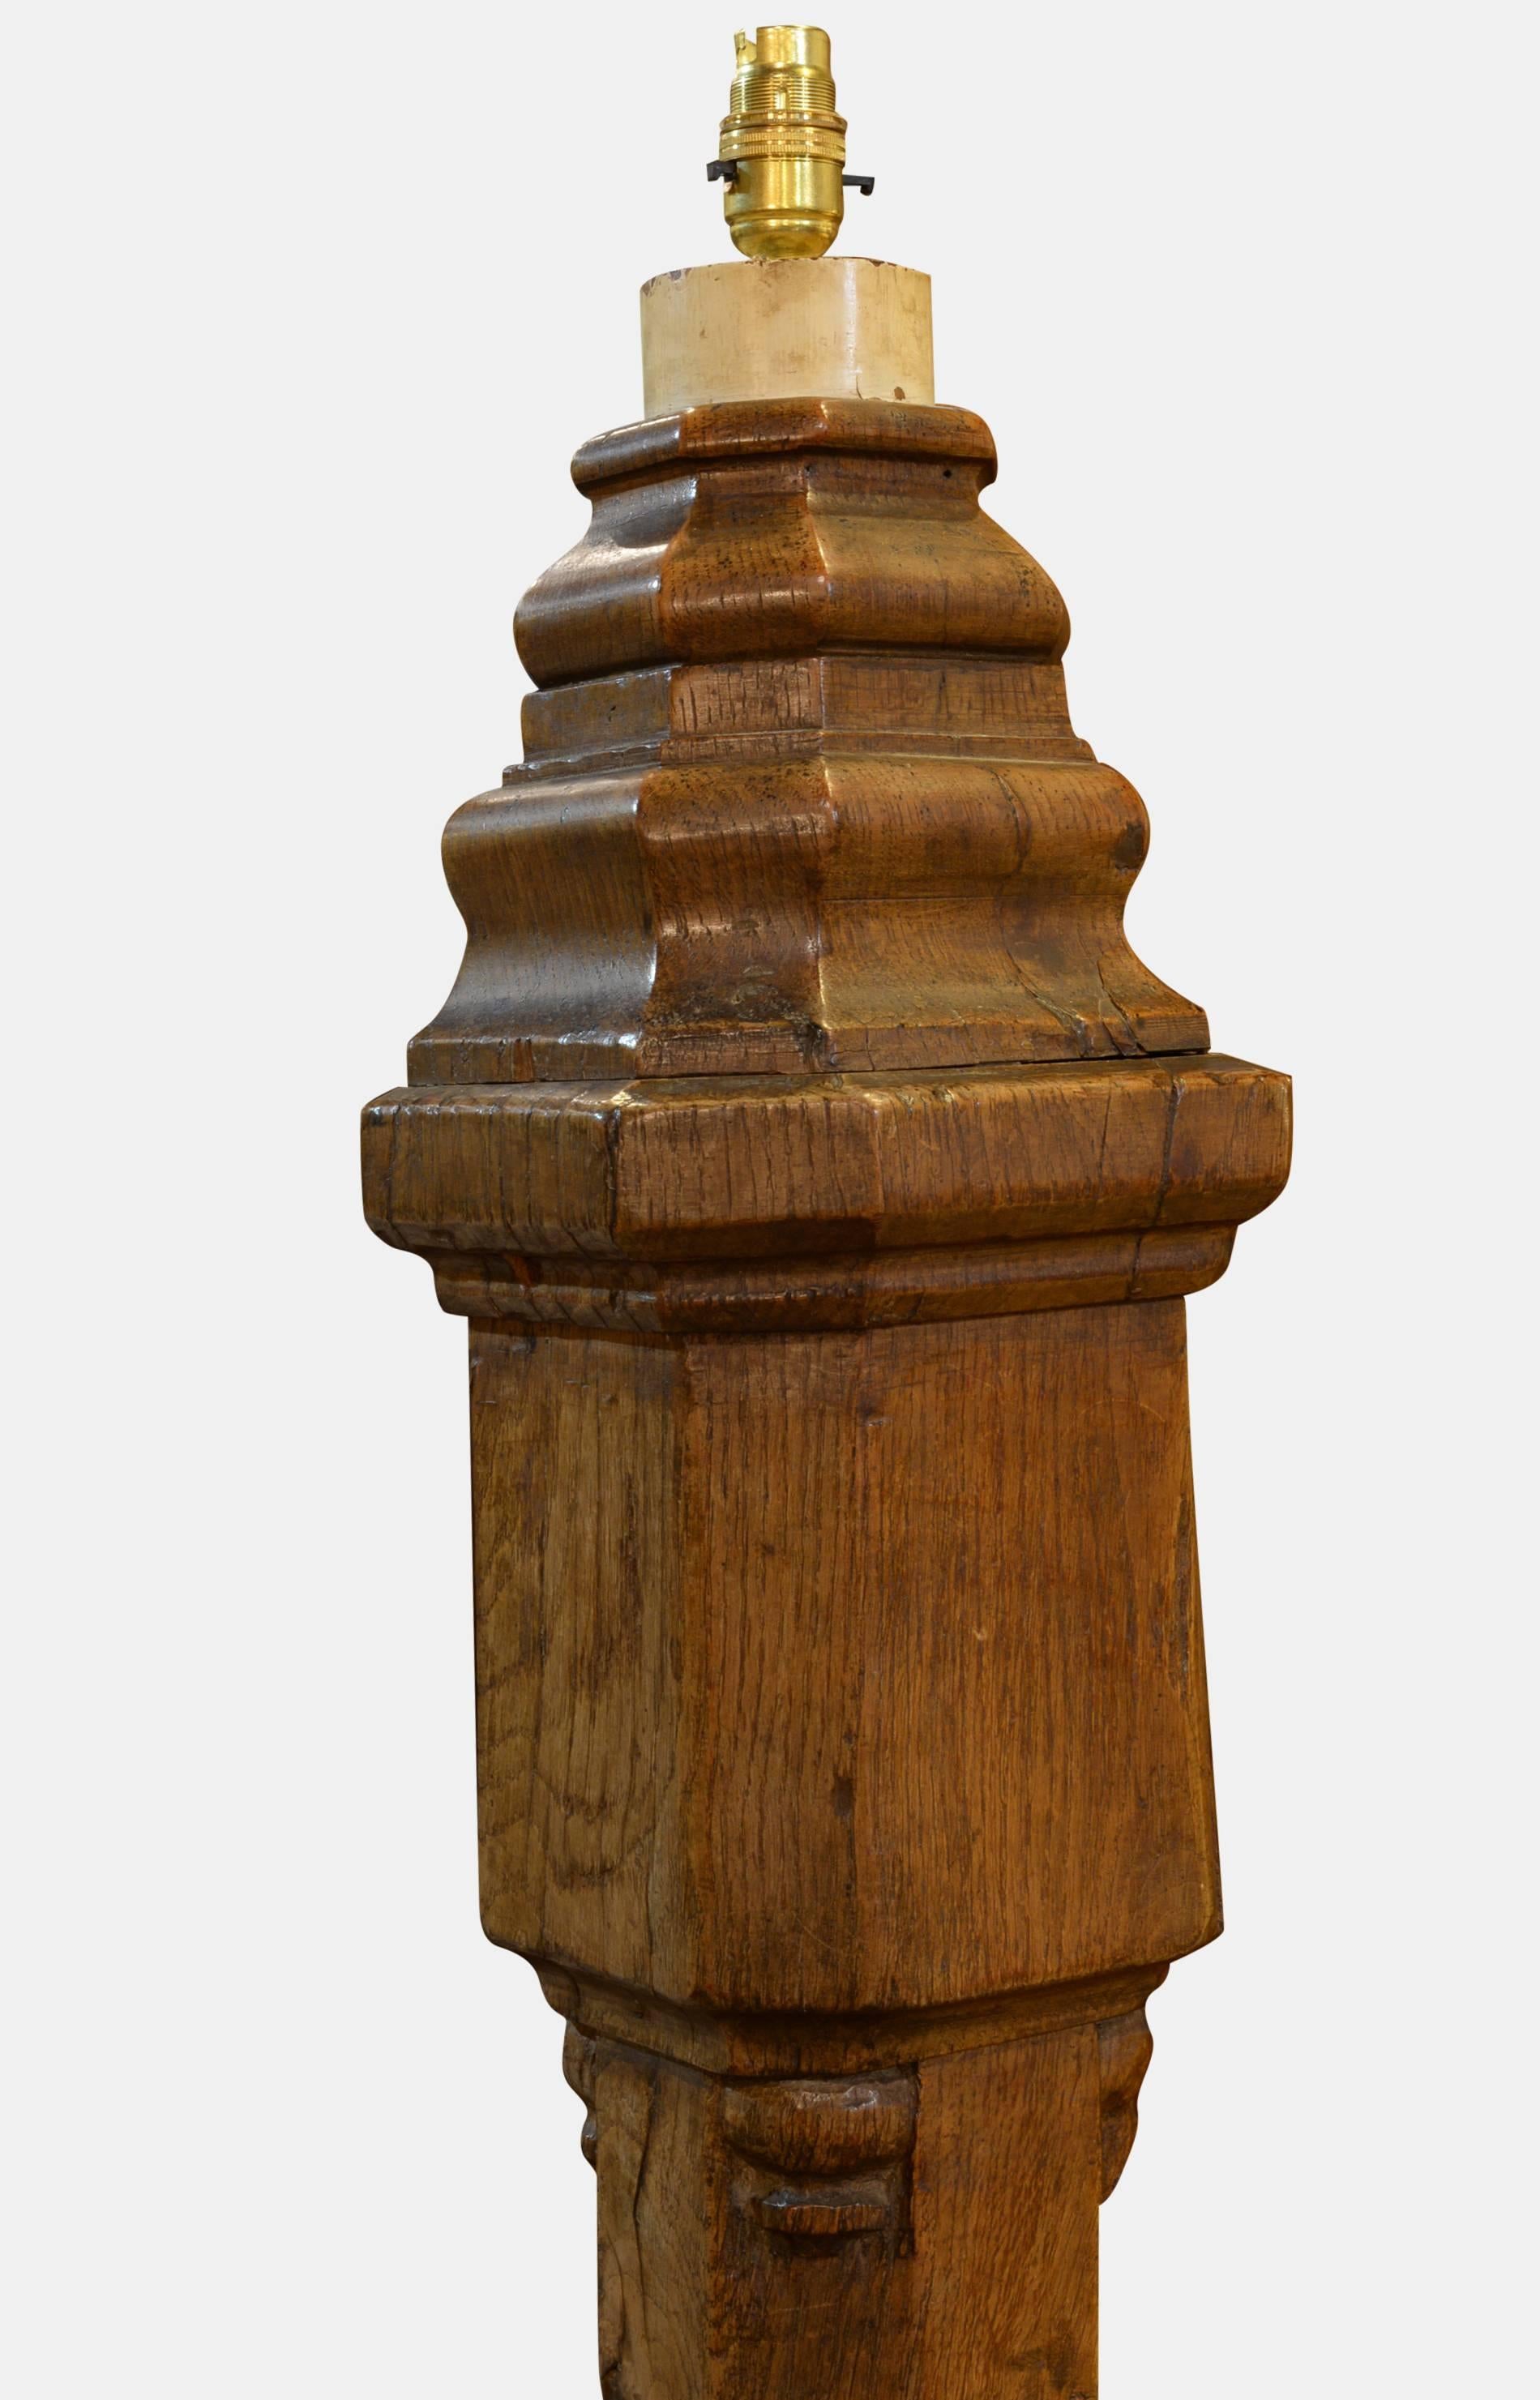 An impressive 16th-17th century oak newel post of fantastic color and patina. Later mounted as a lamp on sledge feet and moulded upper of late 19th-early 20th century.